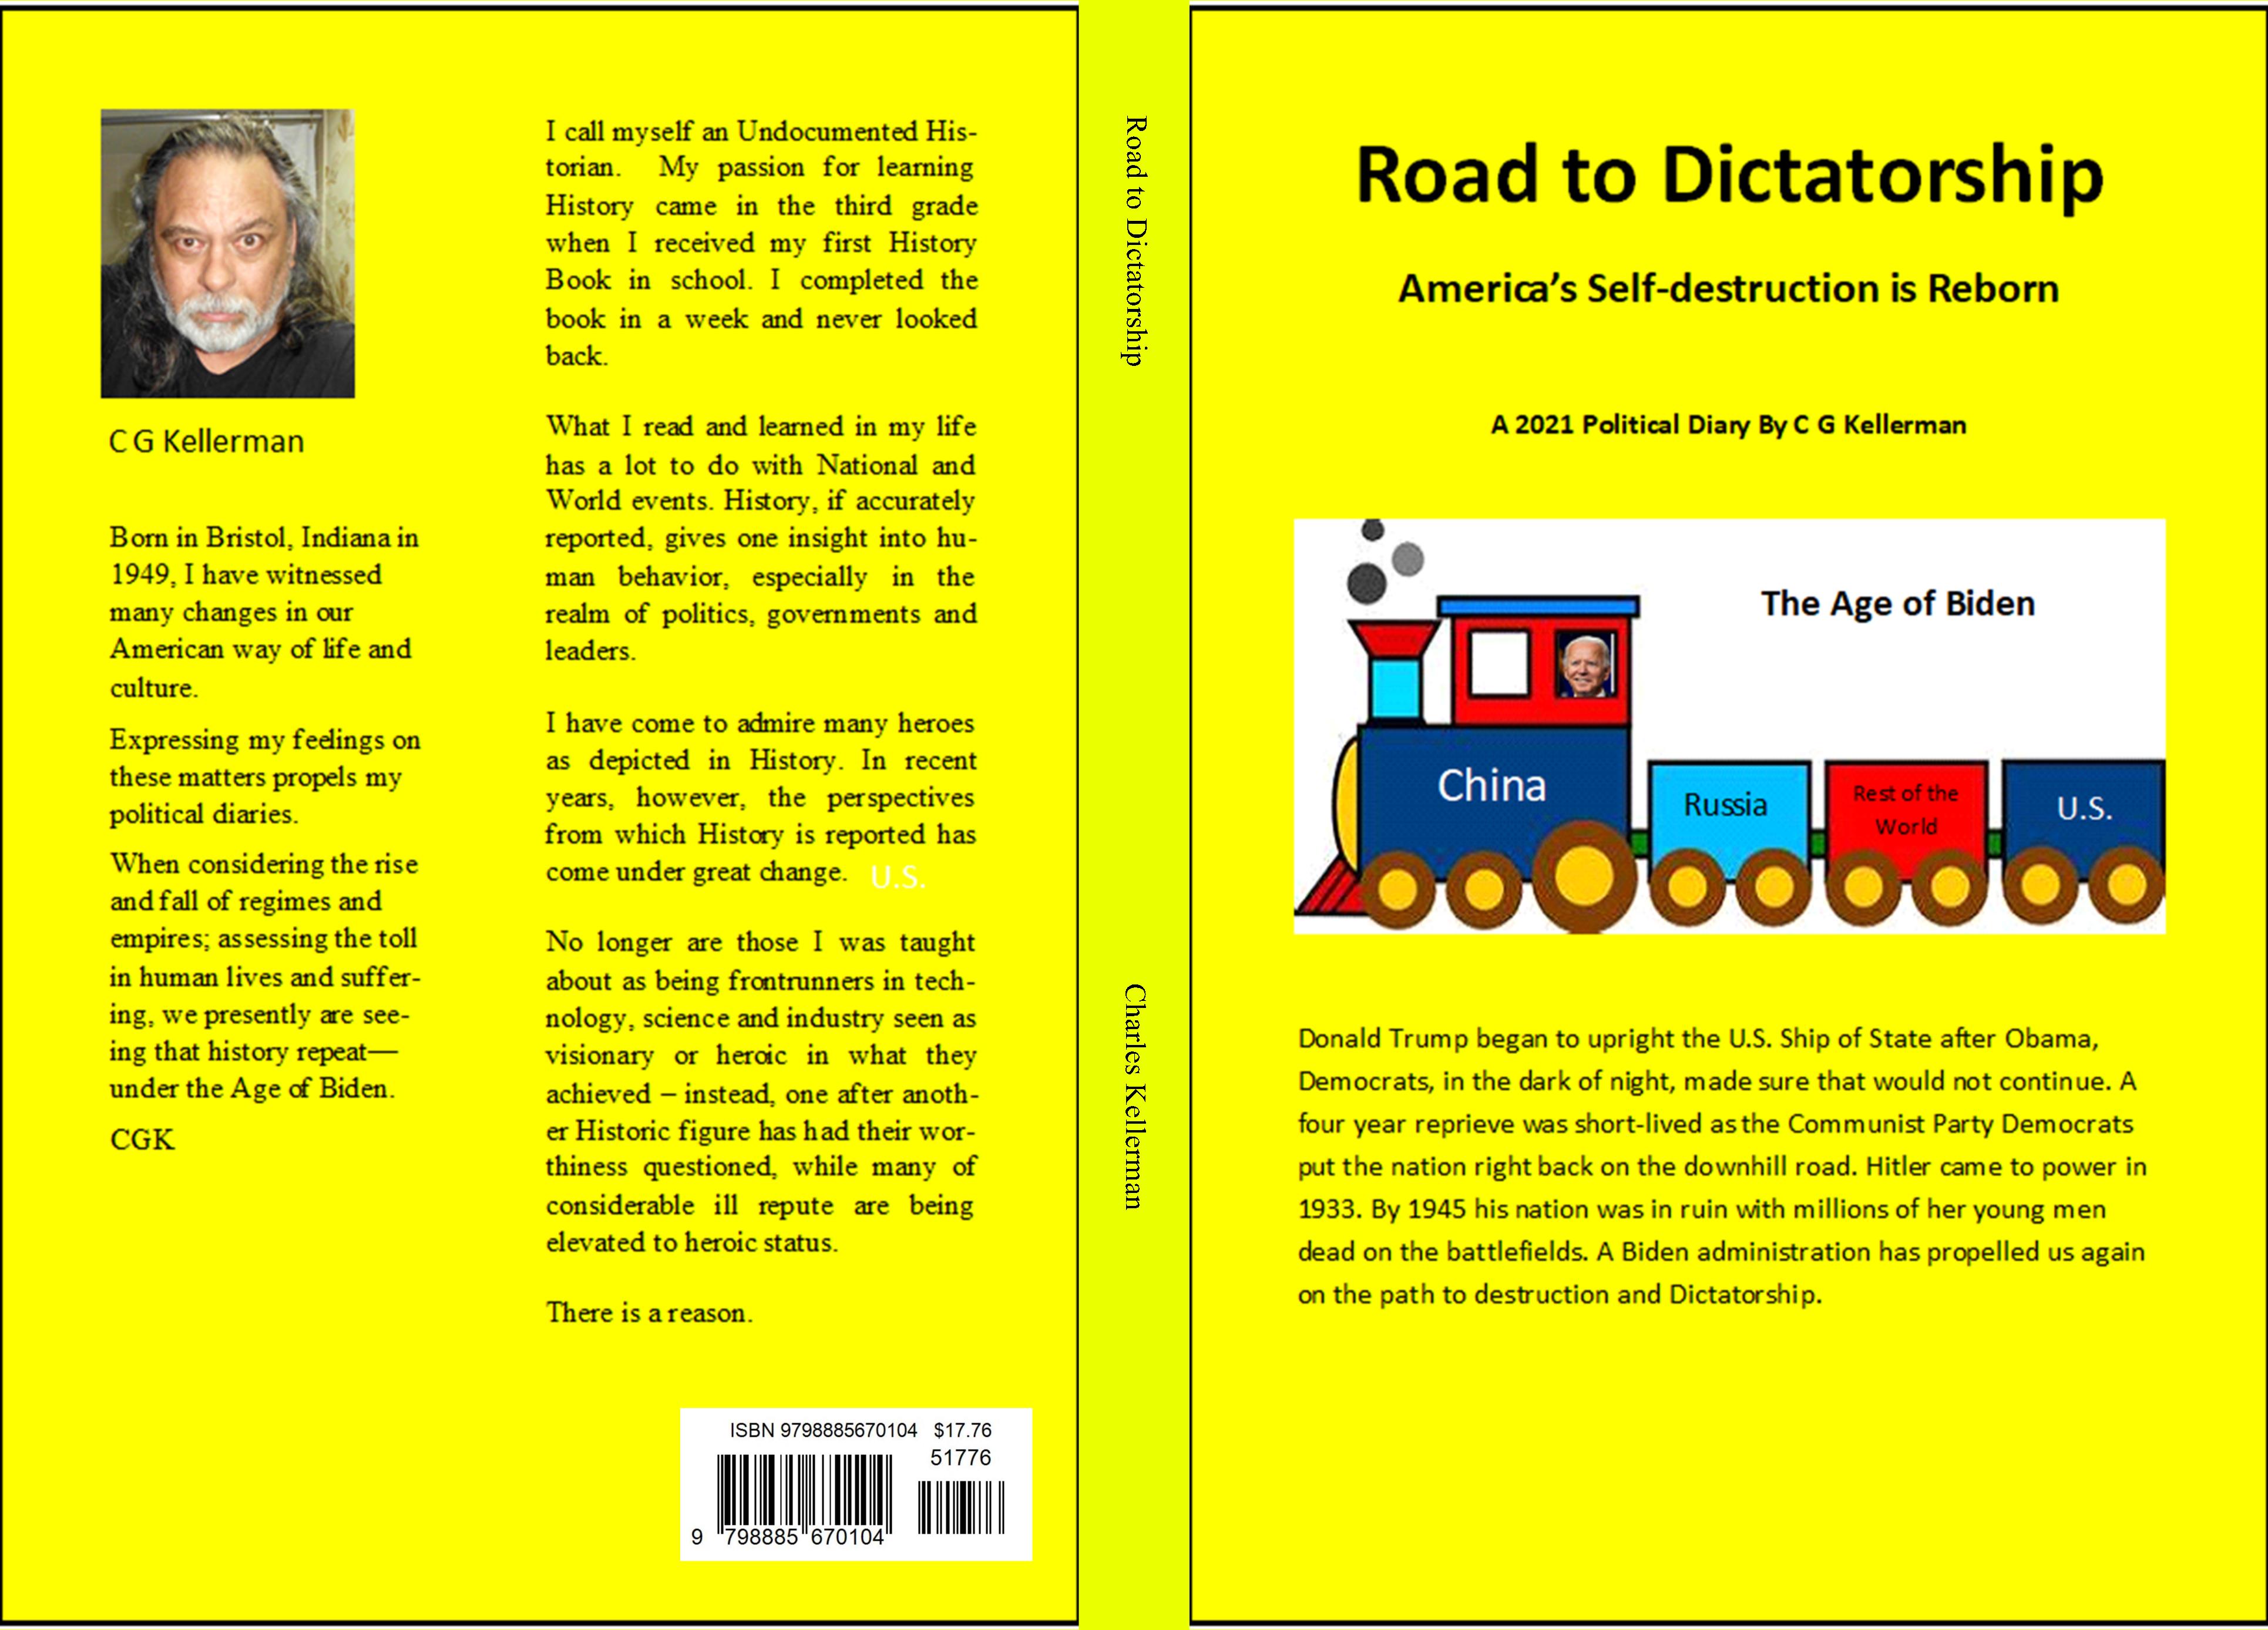 Road to Dictatorship cover image